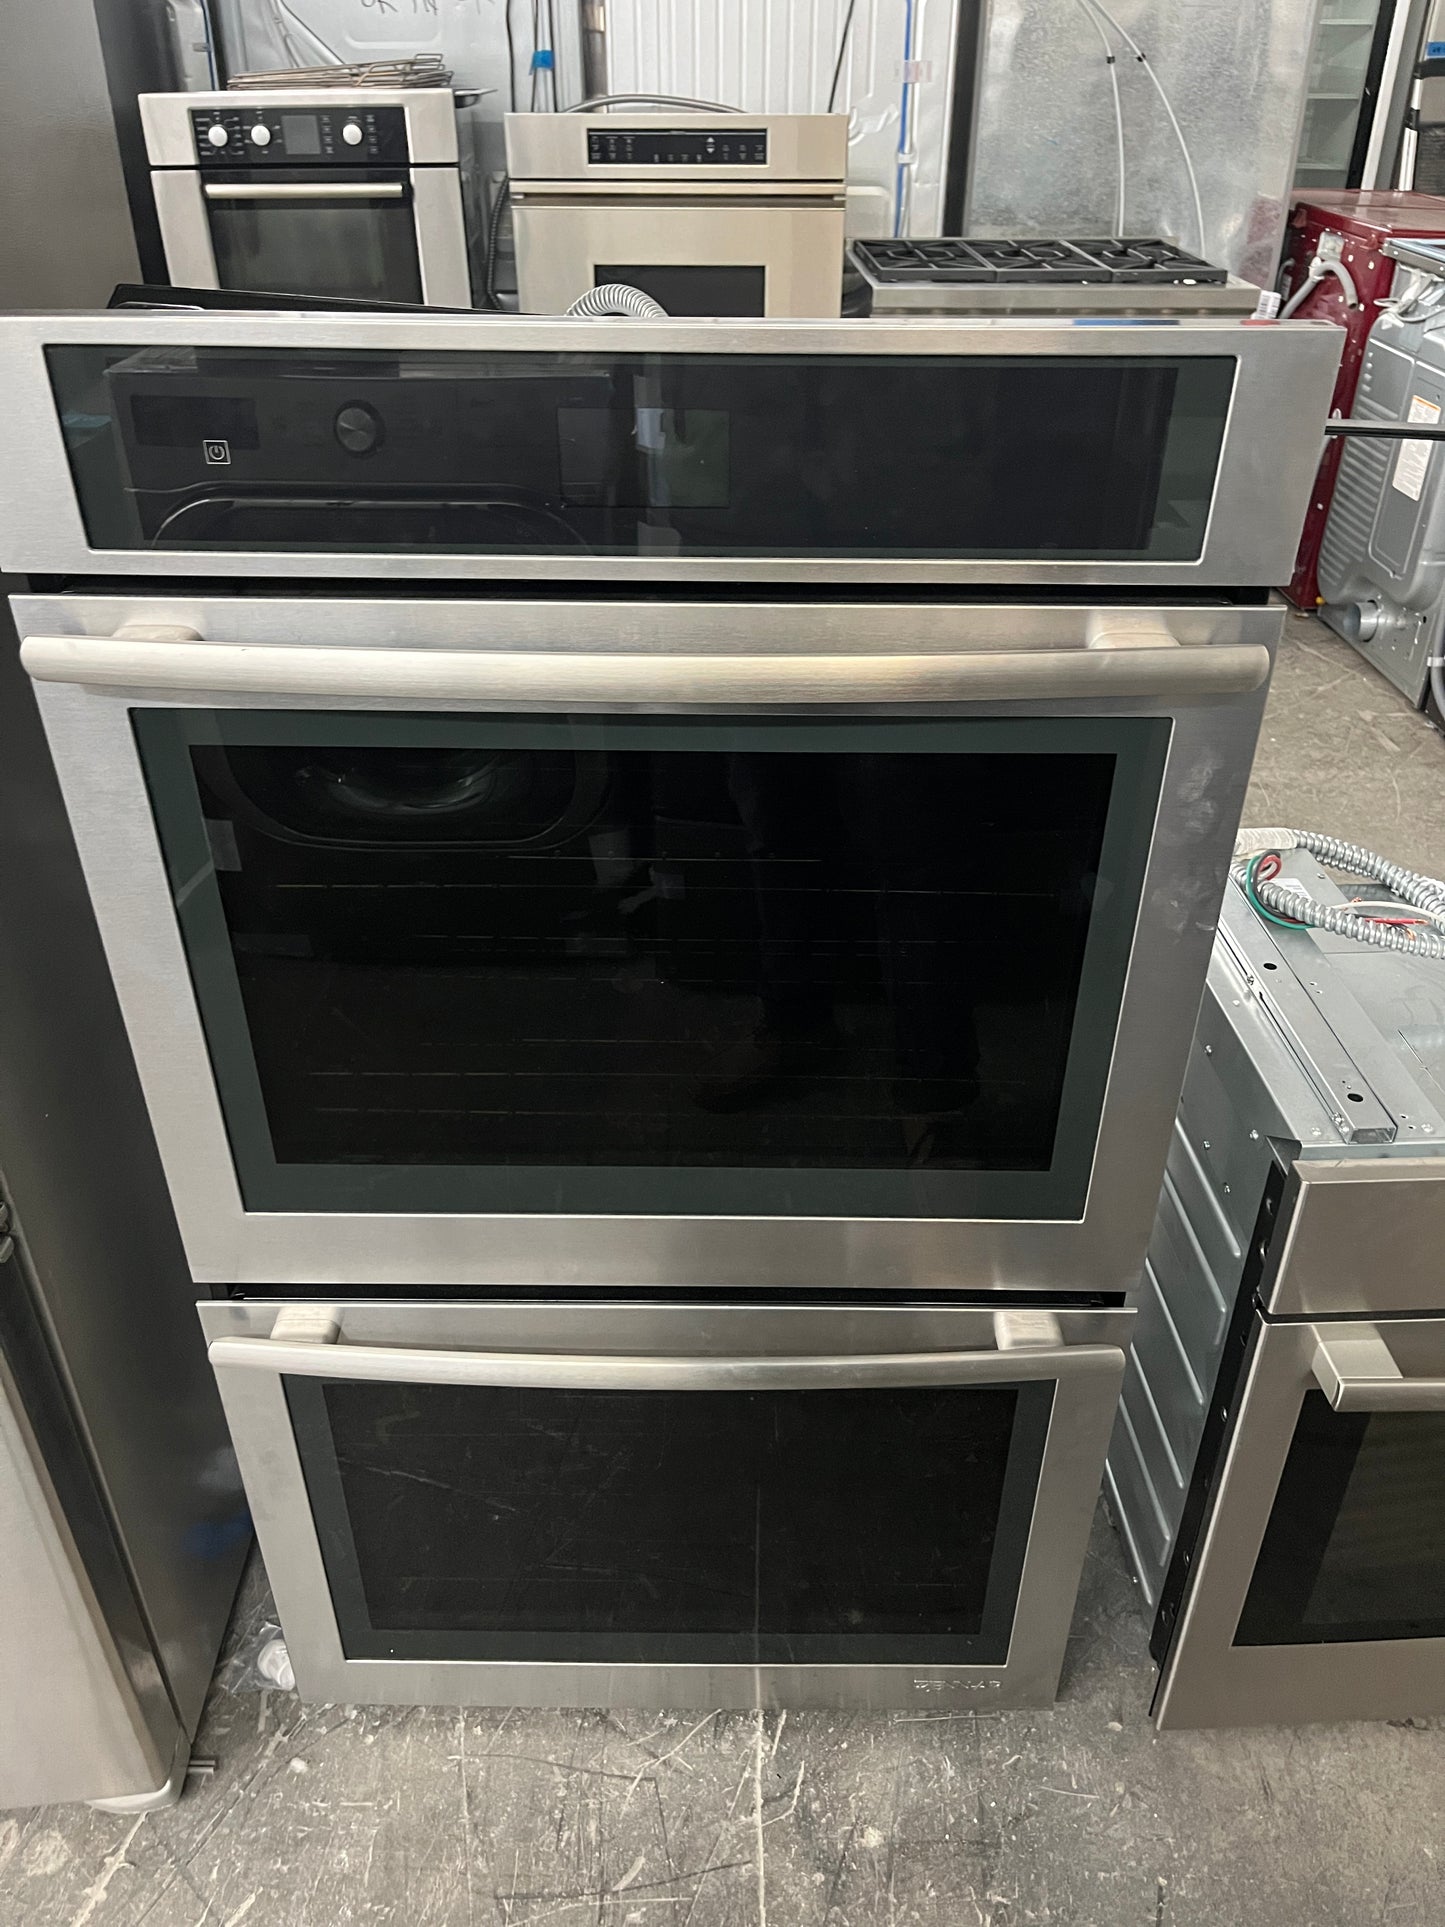 JennAir Euro-Style Series  JJW2830DS 30 Inch Double Combination Electric Wall Oven 10 Cu. Ft. Total Capacity, Multimode Convection System, Self-Clean, Proof Mode, Delay Start, Sabbath, Convect Bake, Convect Broil, Convect Roast,  UL 369302